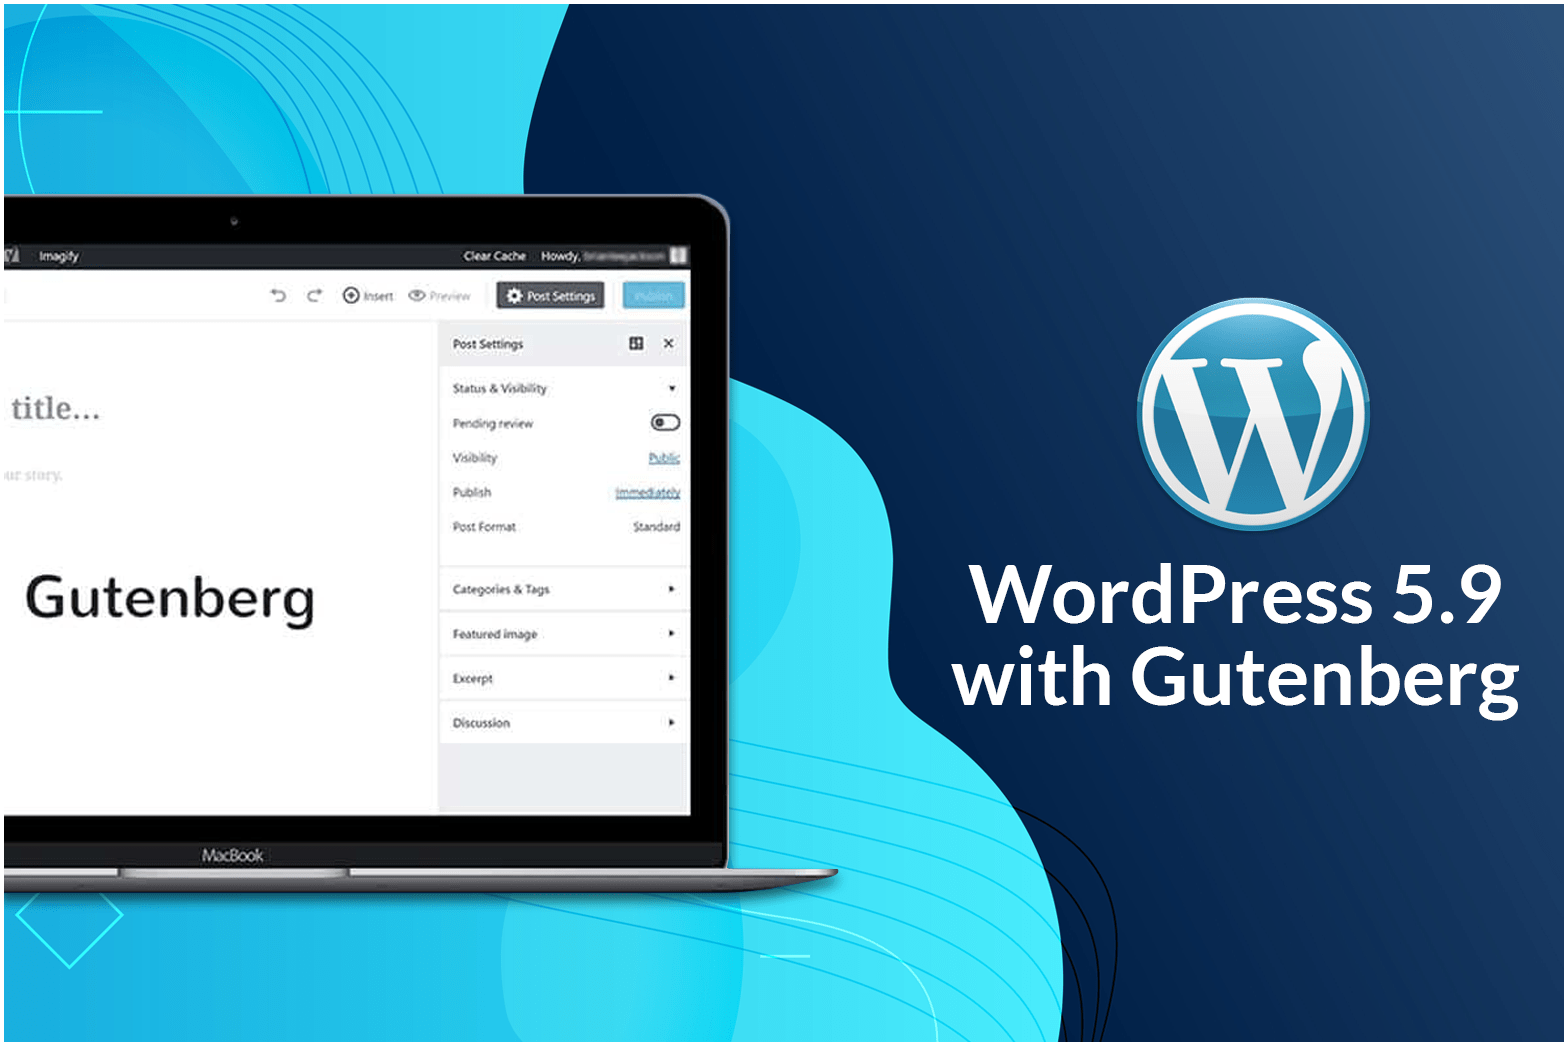 WordPress 5.9 with Gutenberg: All You Need To Know